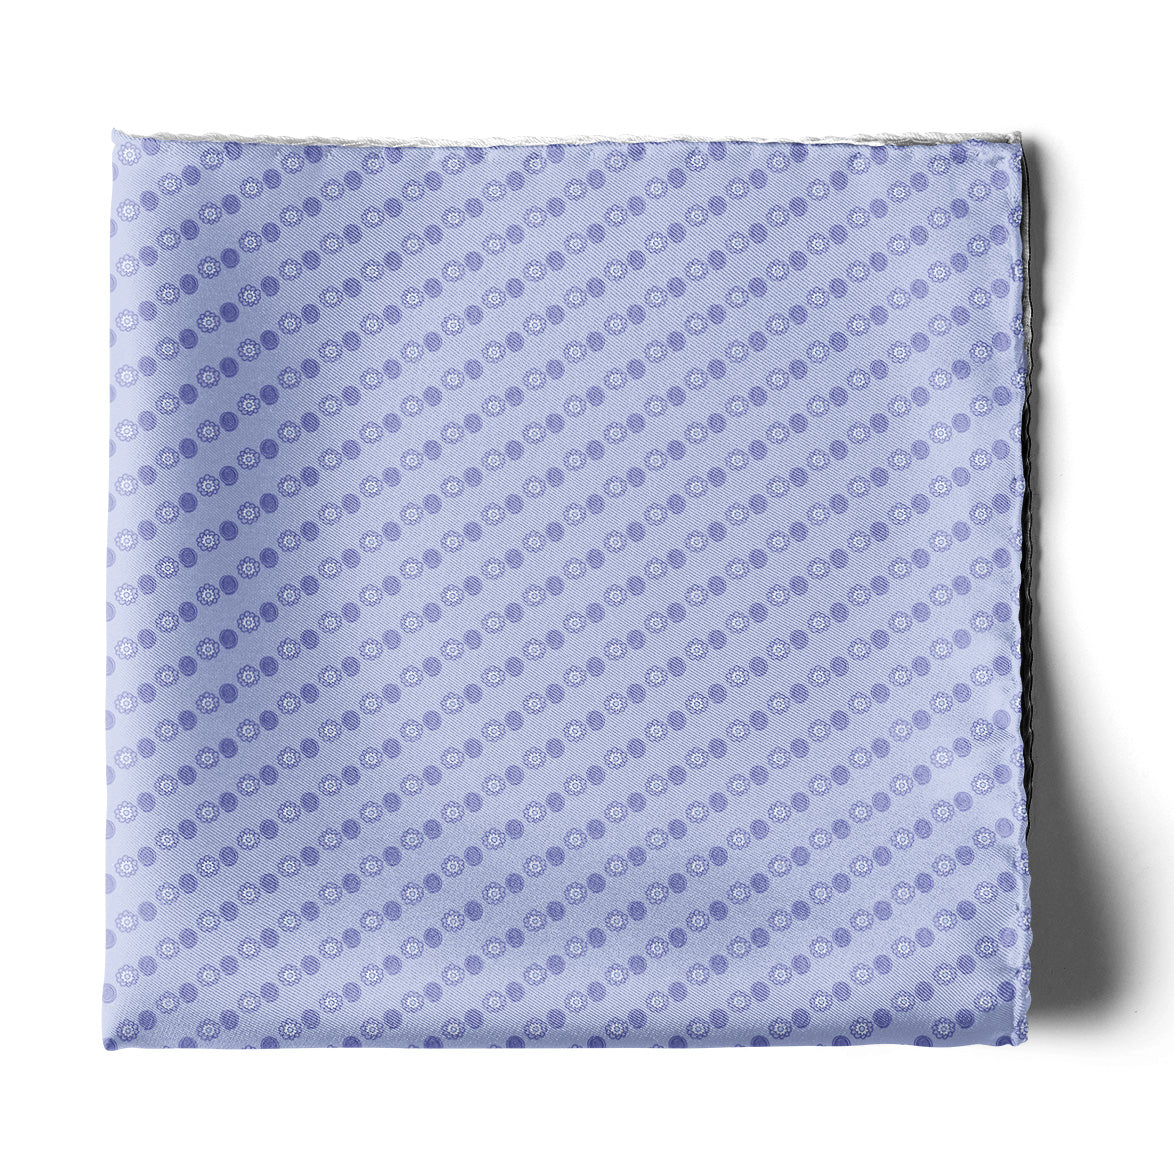 FOUR IN ONE PASTEL LILAC SILK POCKET SQUARE